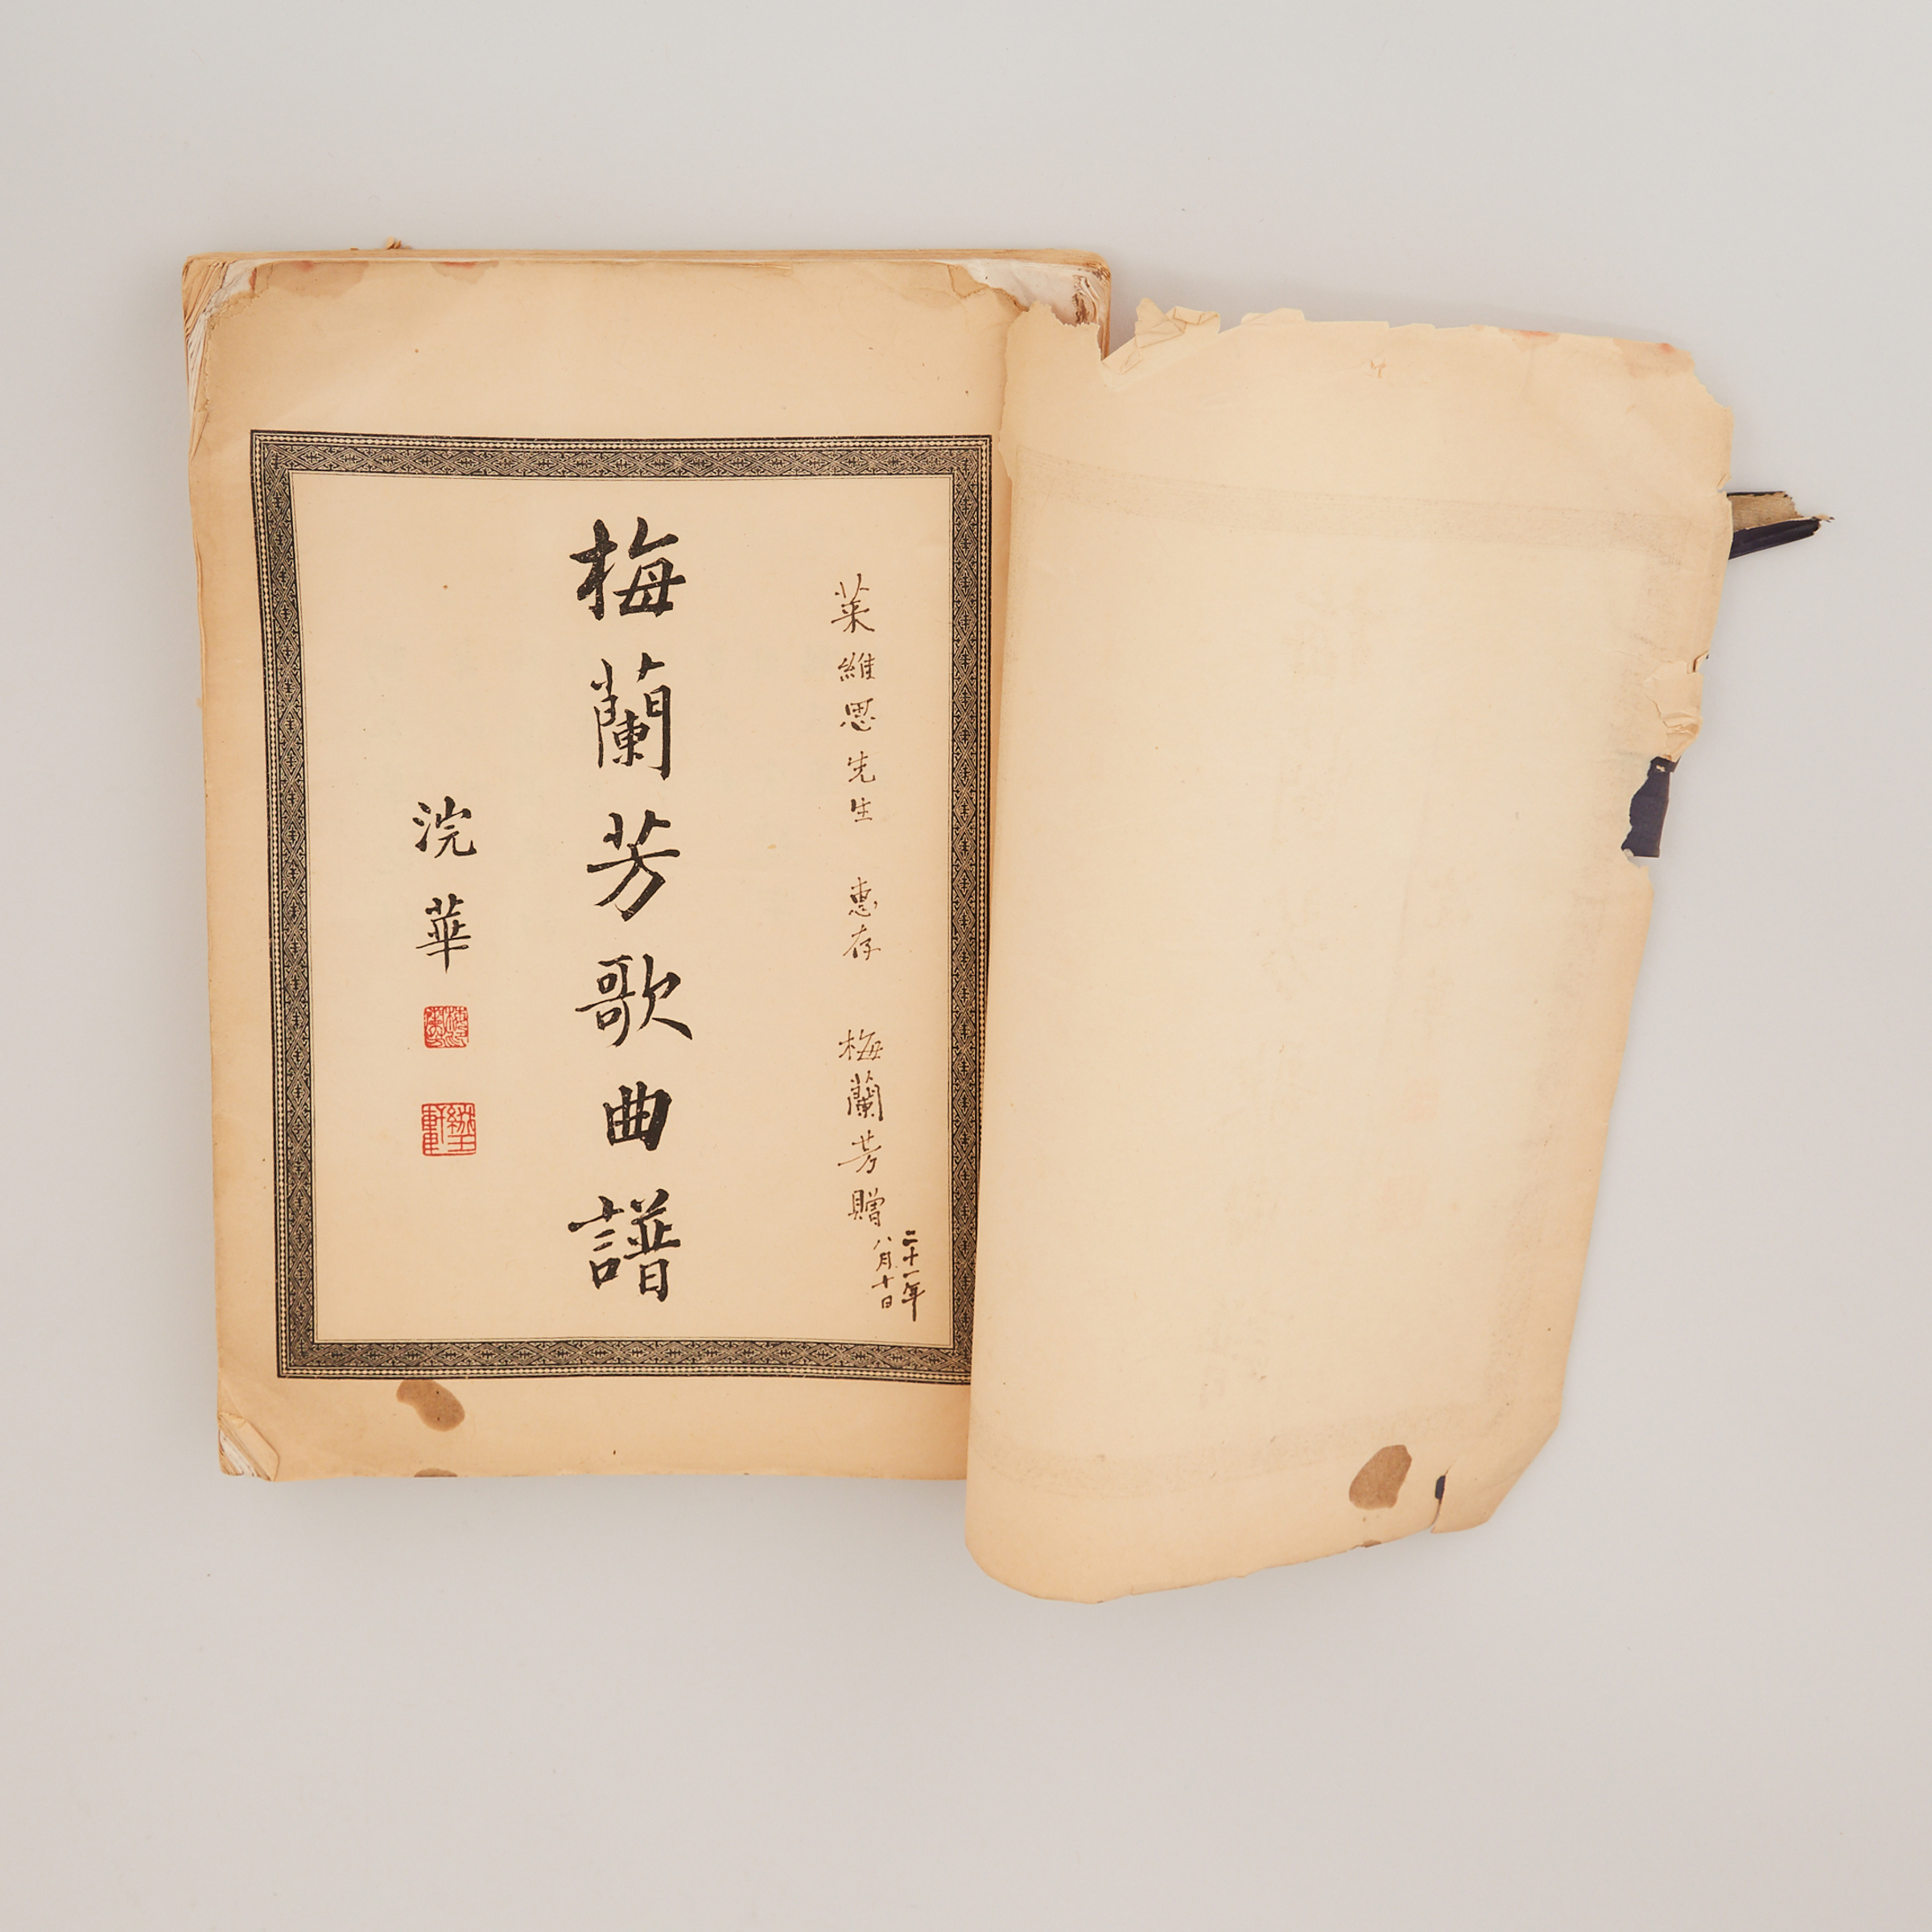 Liu Tianhua (1895-1932), 'Selections from the Repertoire of Operatic Songs and Terpsichorean Melodies of Mei Lan-fang', signed by Mei Lanfang, Circa 1930